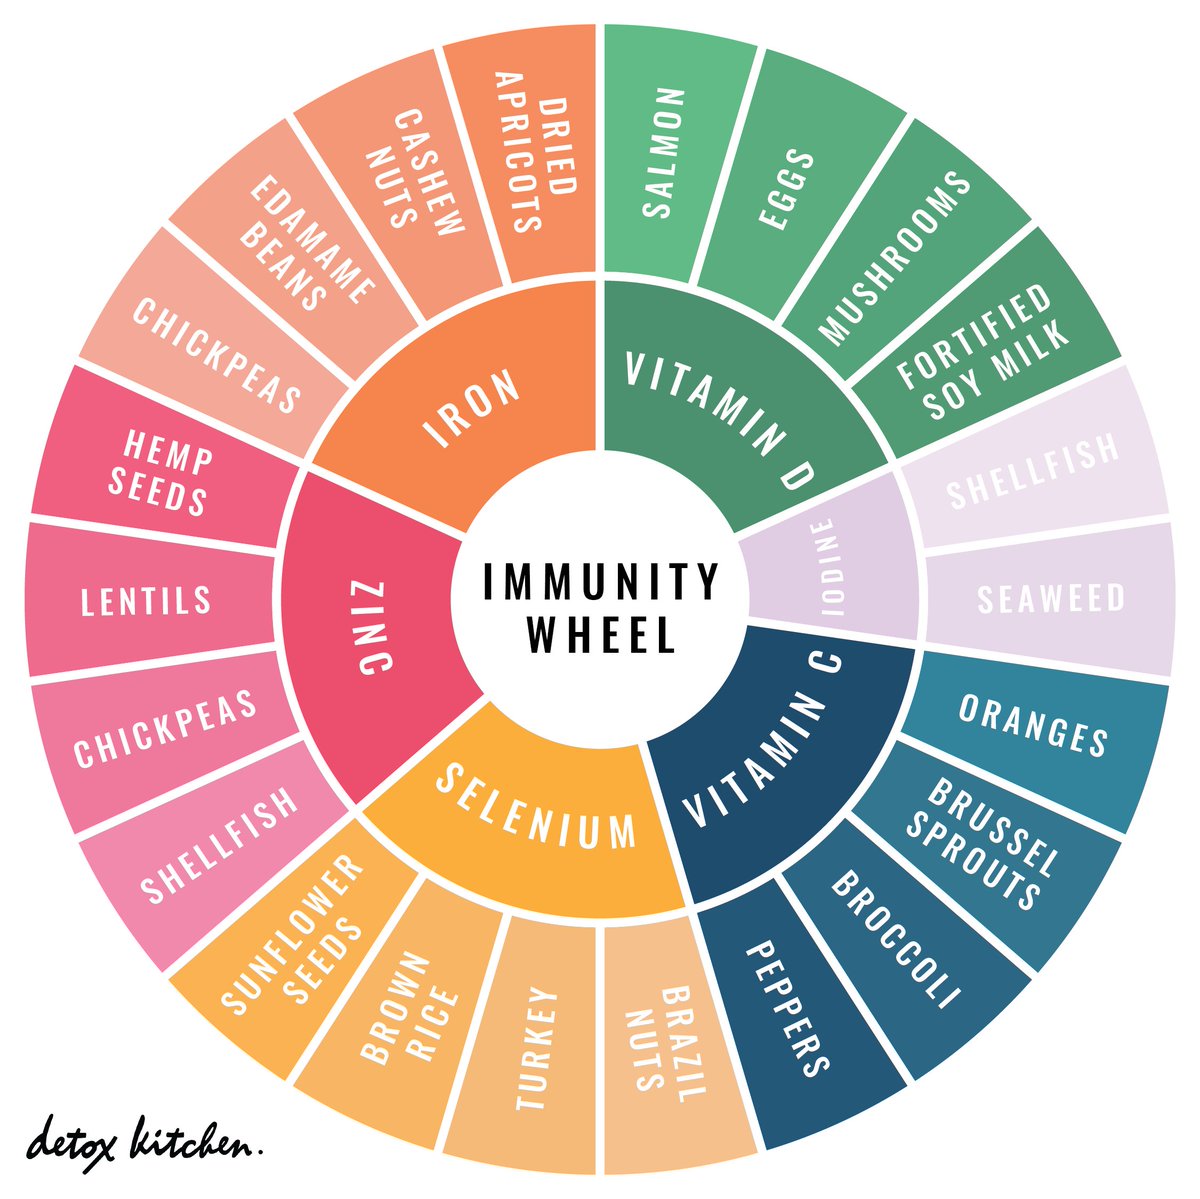 THE IMMUNITY WHEEL - Food is medicine. The more fresh, whole ingredients we eat the less likely we are to develop preventable illnesses. We chatted to Immunologist Dr Jenna Macciochi about the 360 approach to a healthy immune system: detoxkitchen.co.uk/health/dr-jenn… #Immunity